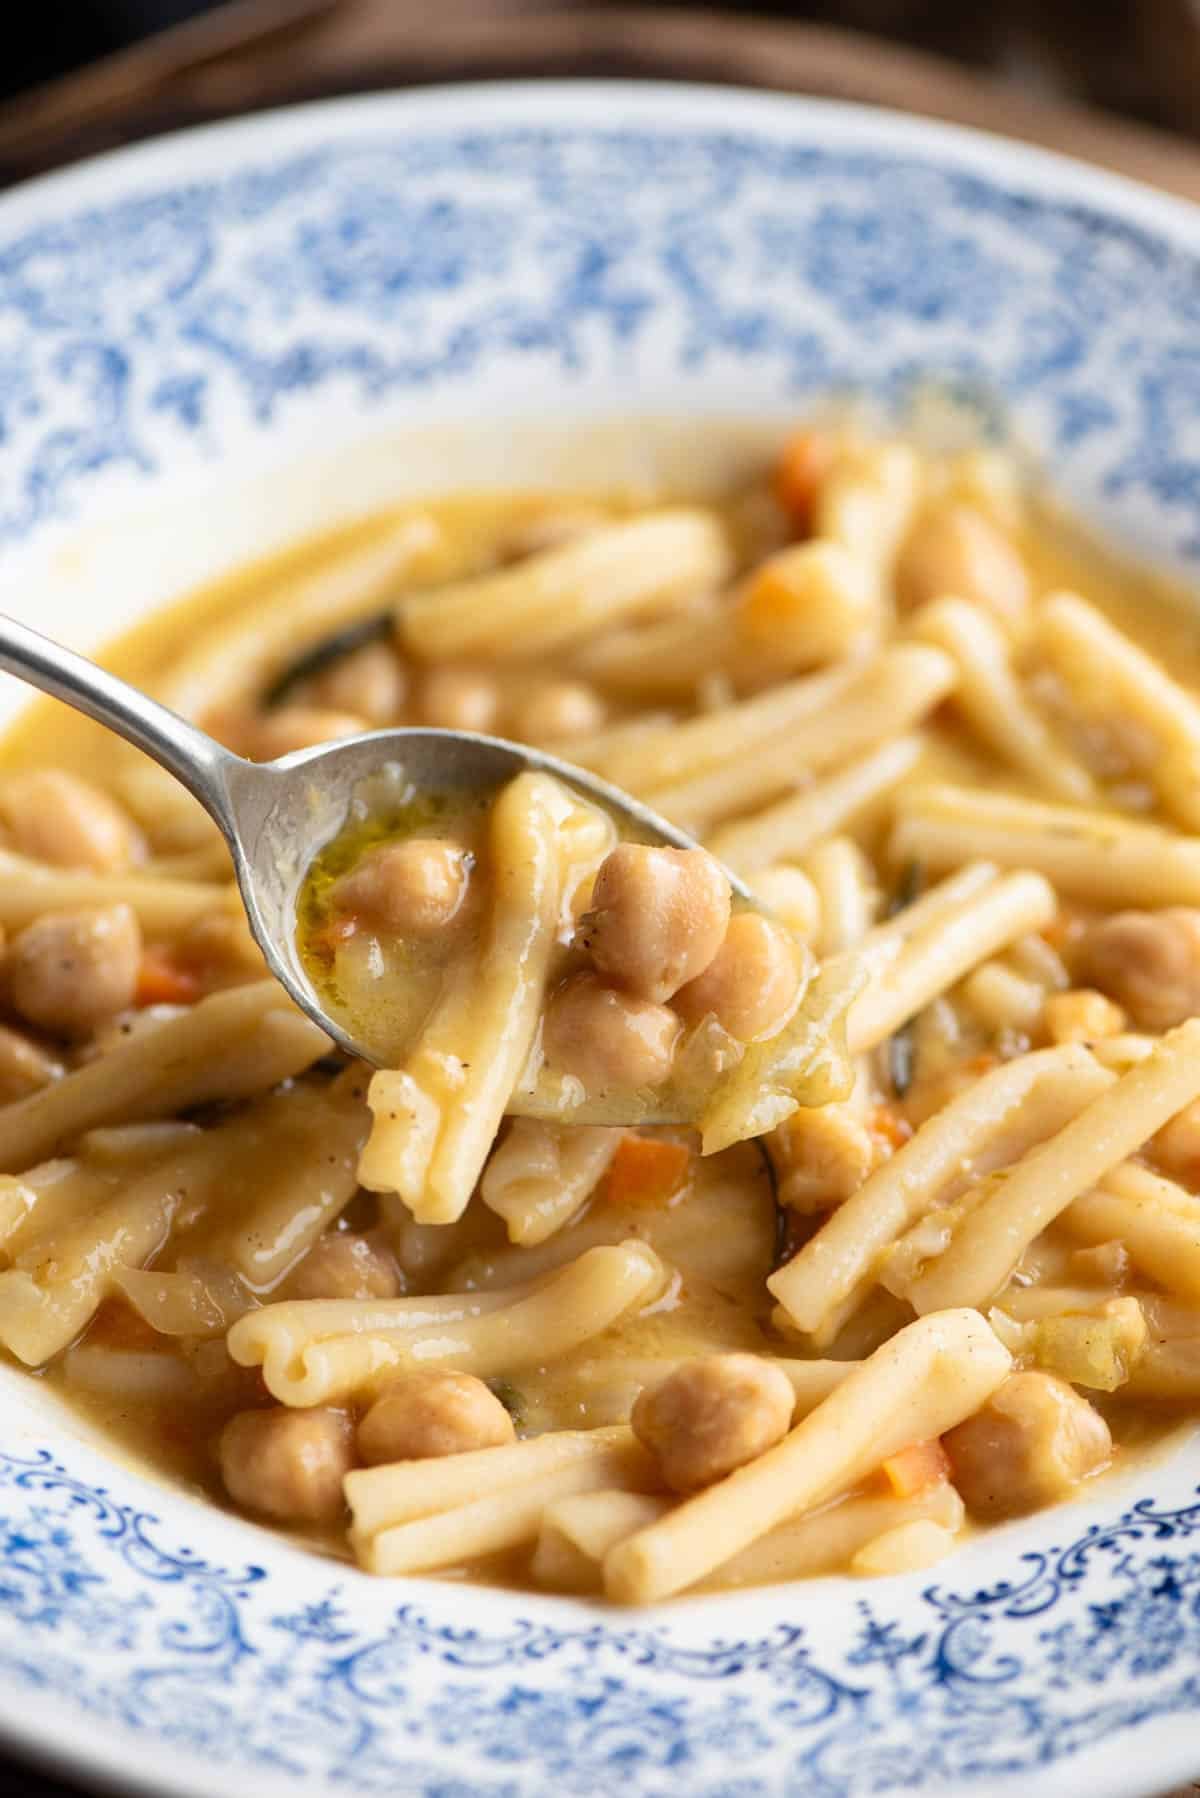 A close up of a spoonful of pasta and chickpeas over a blue bowl.